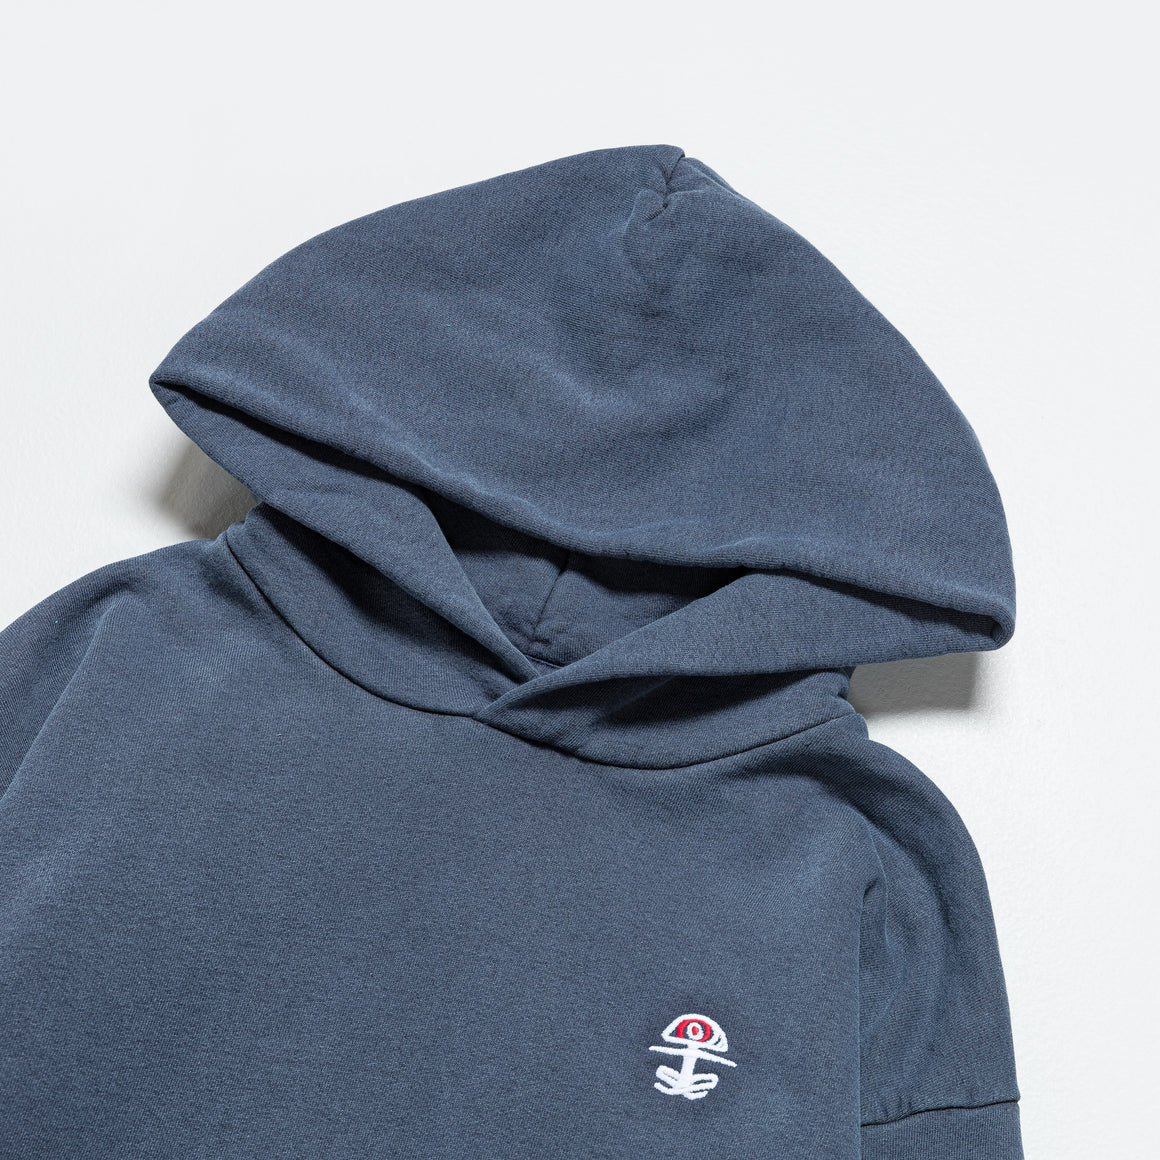 District Vision - Mudita Pullover Hoodie - Navy Pigment - Up There Athletics